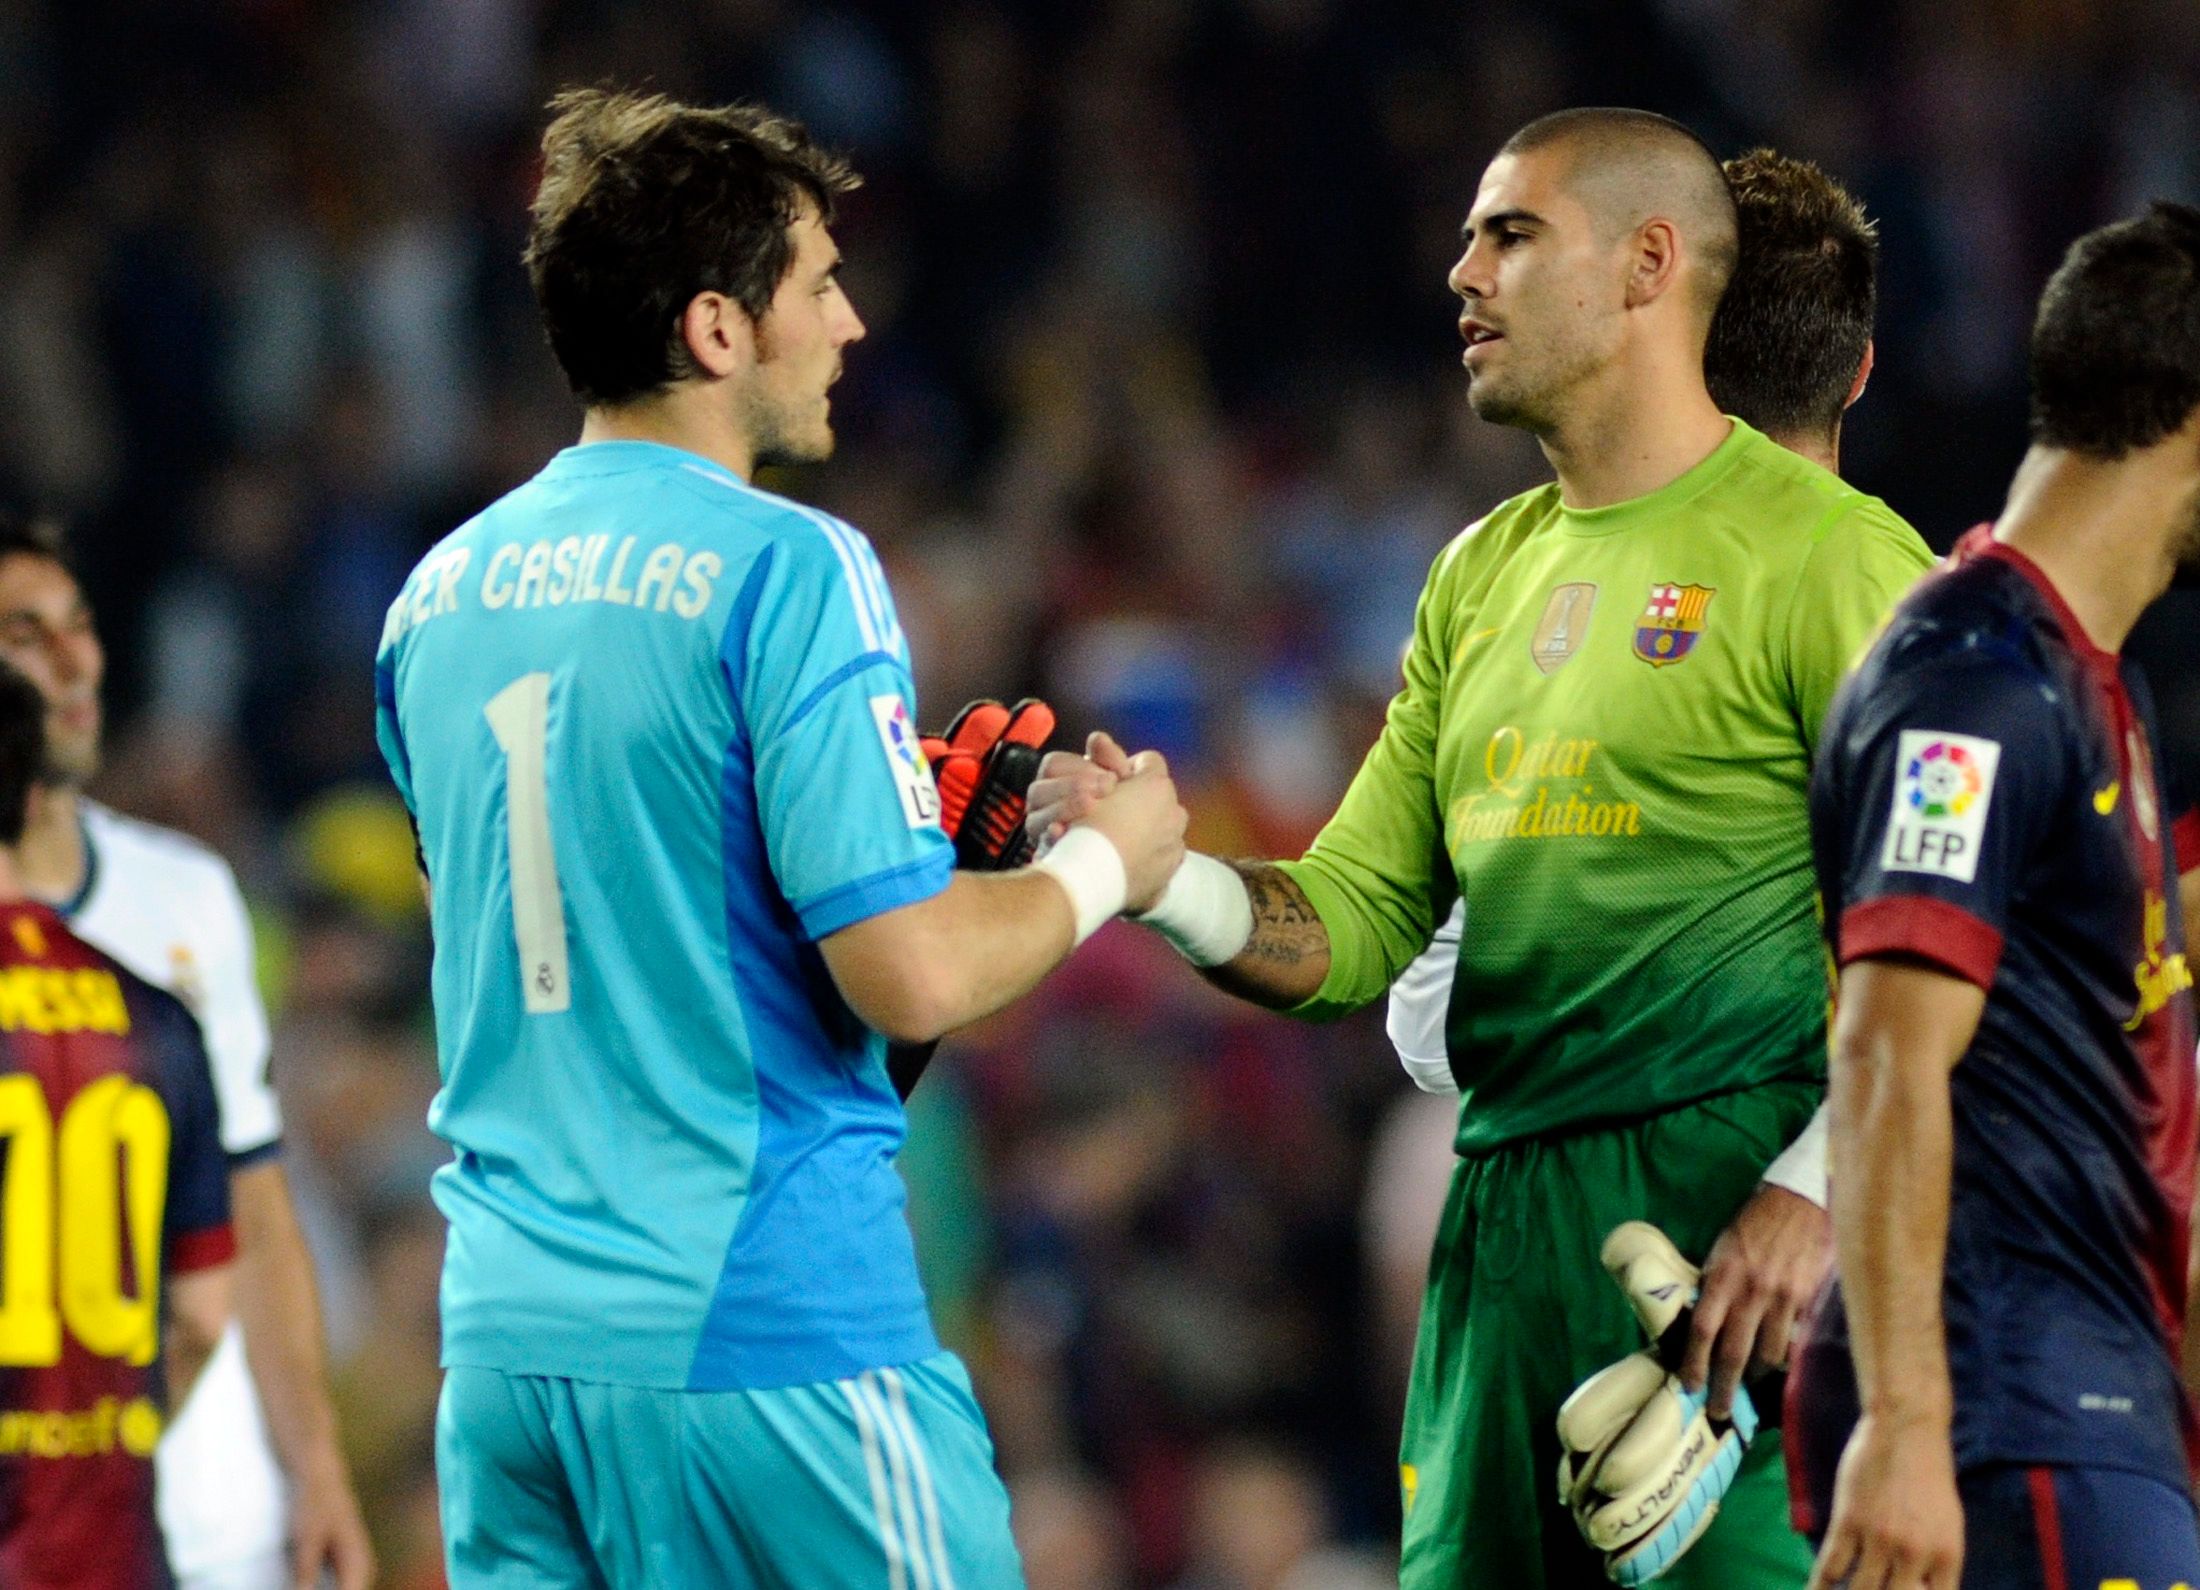 Real Madrid's goalkeeper Iker Casillas (L) greets Barcelona's goalkeeper Victor Valdes at the end of their Spanish first division soccer match at Nou Camp stadium in Barcelona, October 7, 2012.     REUTERS/Sergio Carmona (SPAIN - Tags: SPORT SOCCER)